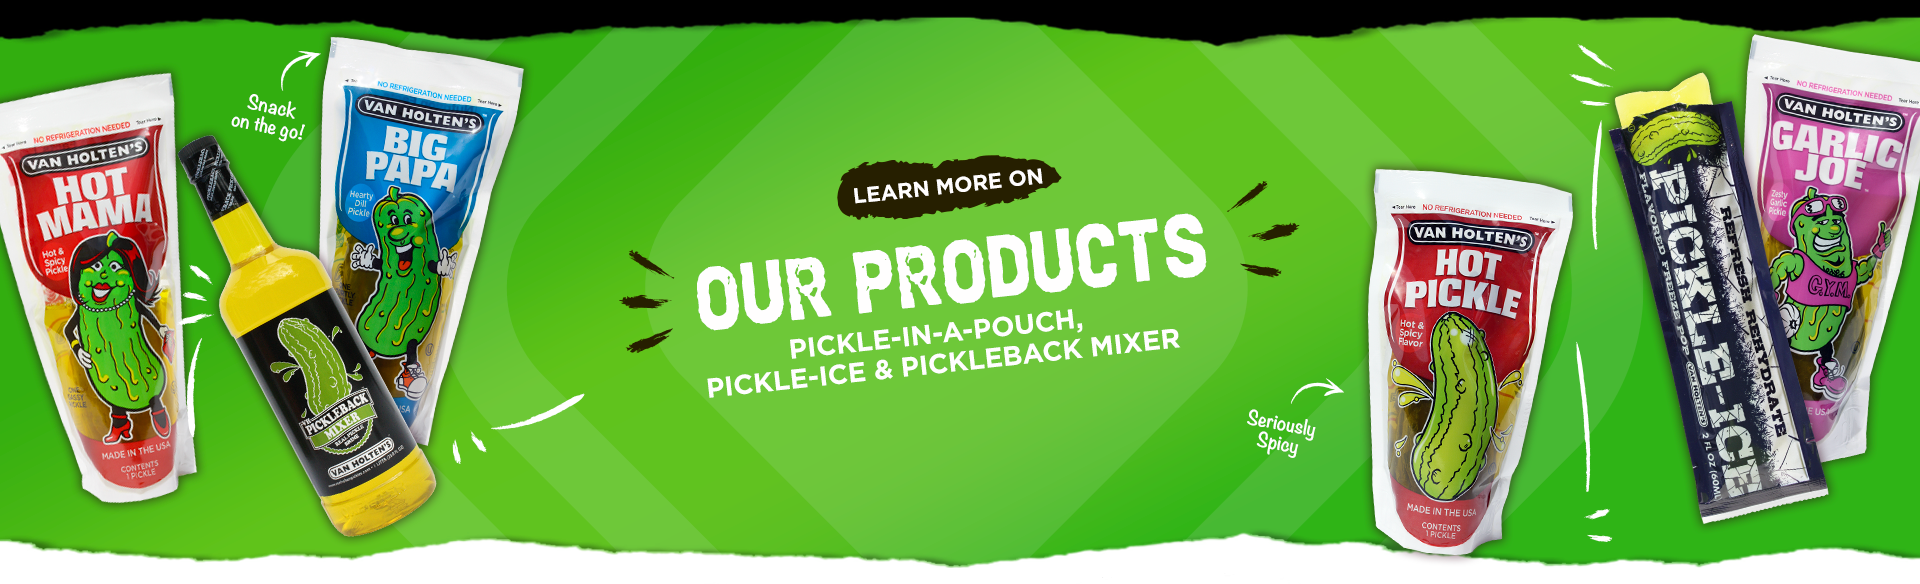 Our Products Pickle-in-a-Pouch, Pickle-Ice and Pickleback Mixer